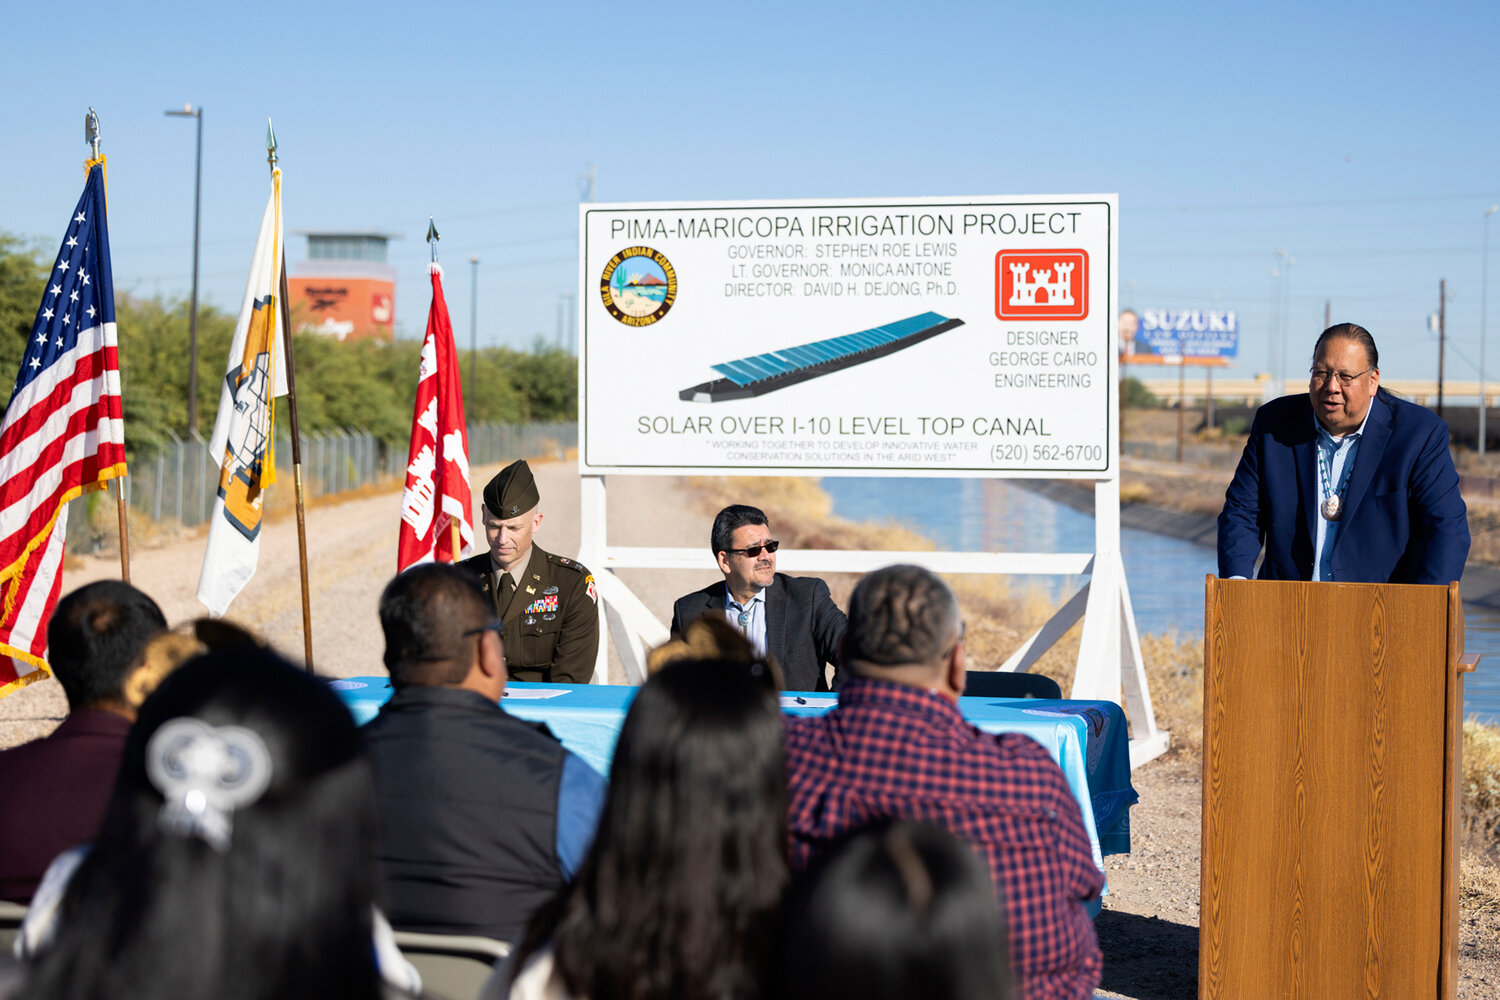 In this image provided by the Gila River Indian Community, Gov. Stephen Roe Lewis gives a speech during the signing of an agreement with the U.S. Army Corps of Engineers to put solar panels over a stretch of irrigation canal on the tribe’s land near Chandler on Nov. 9.